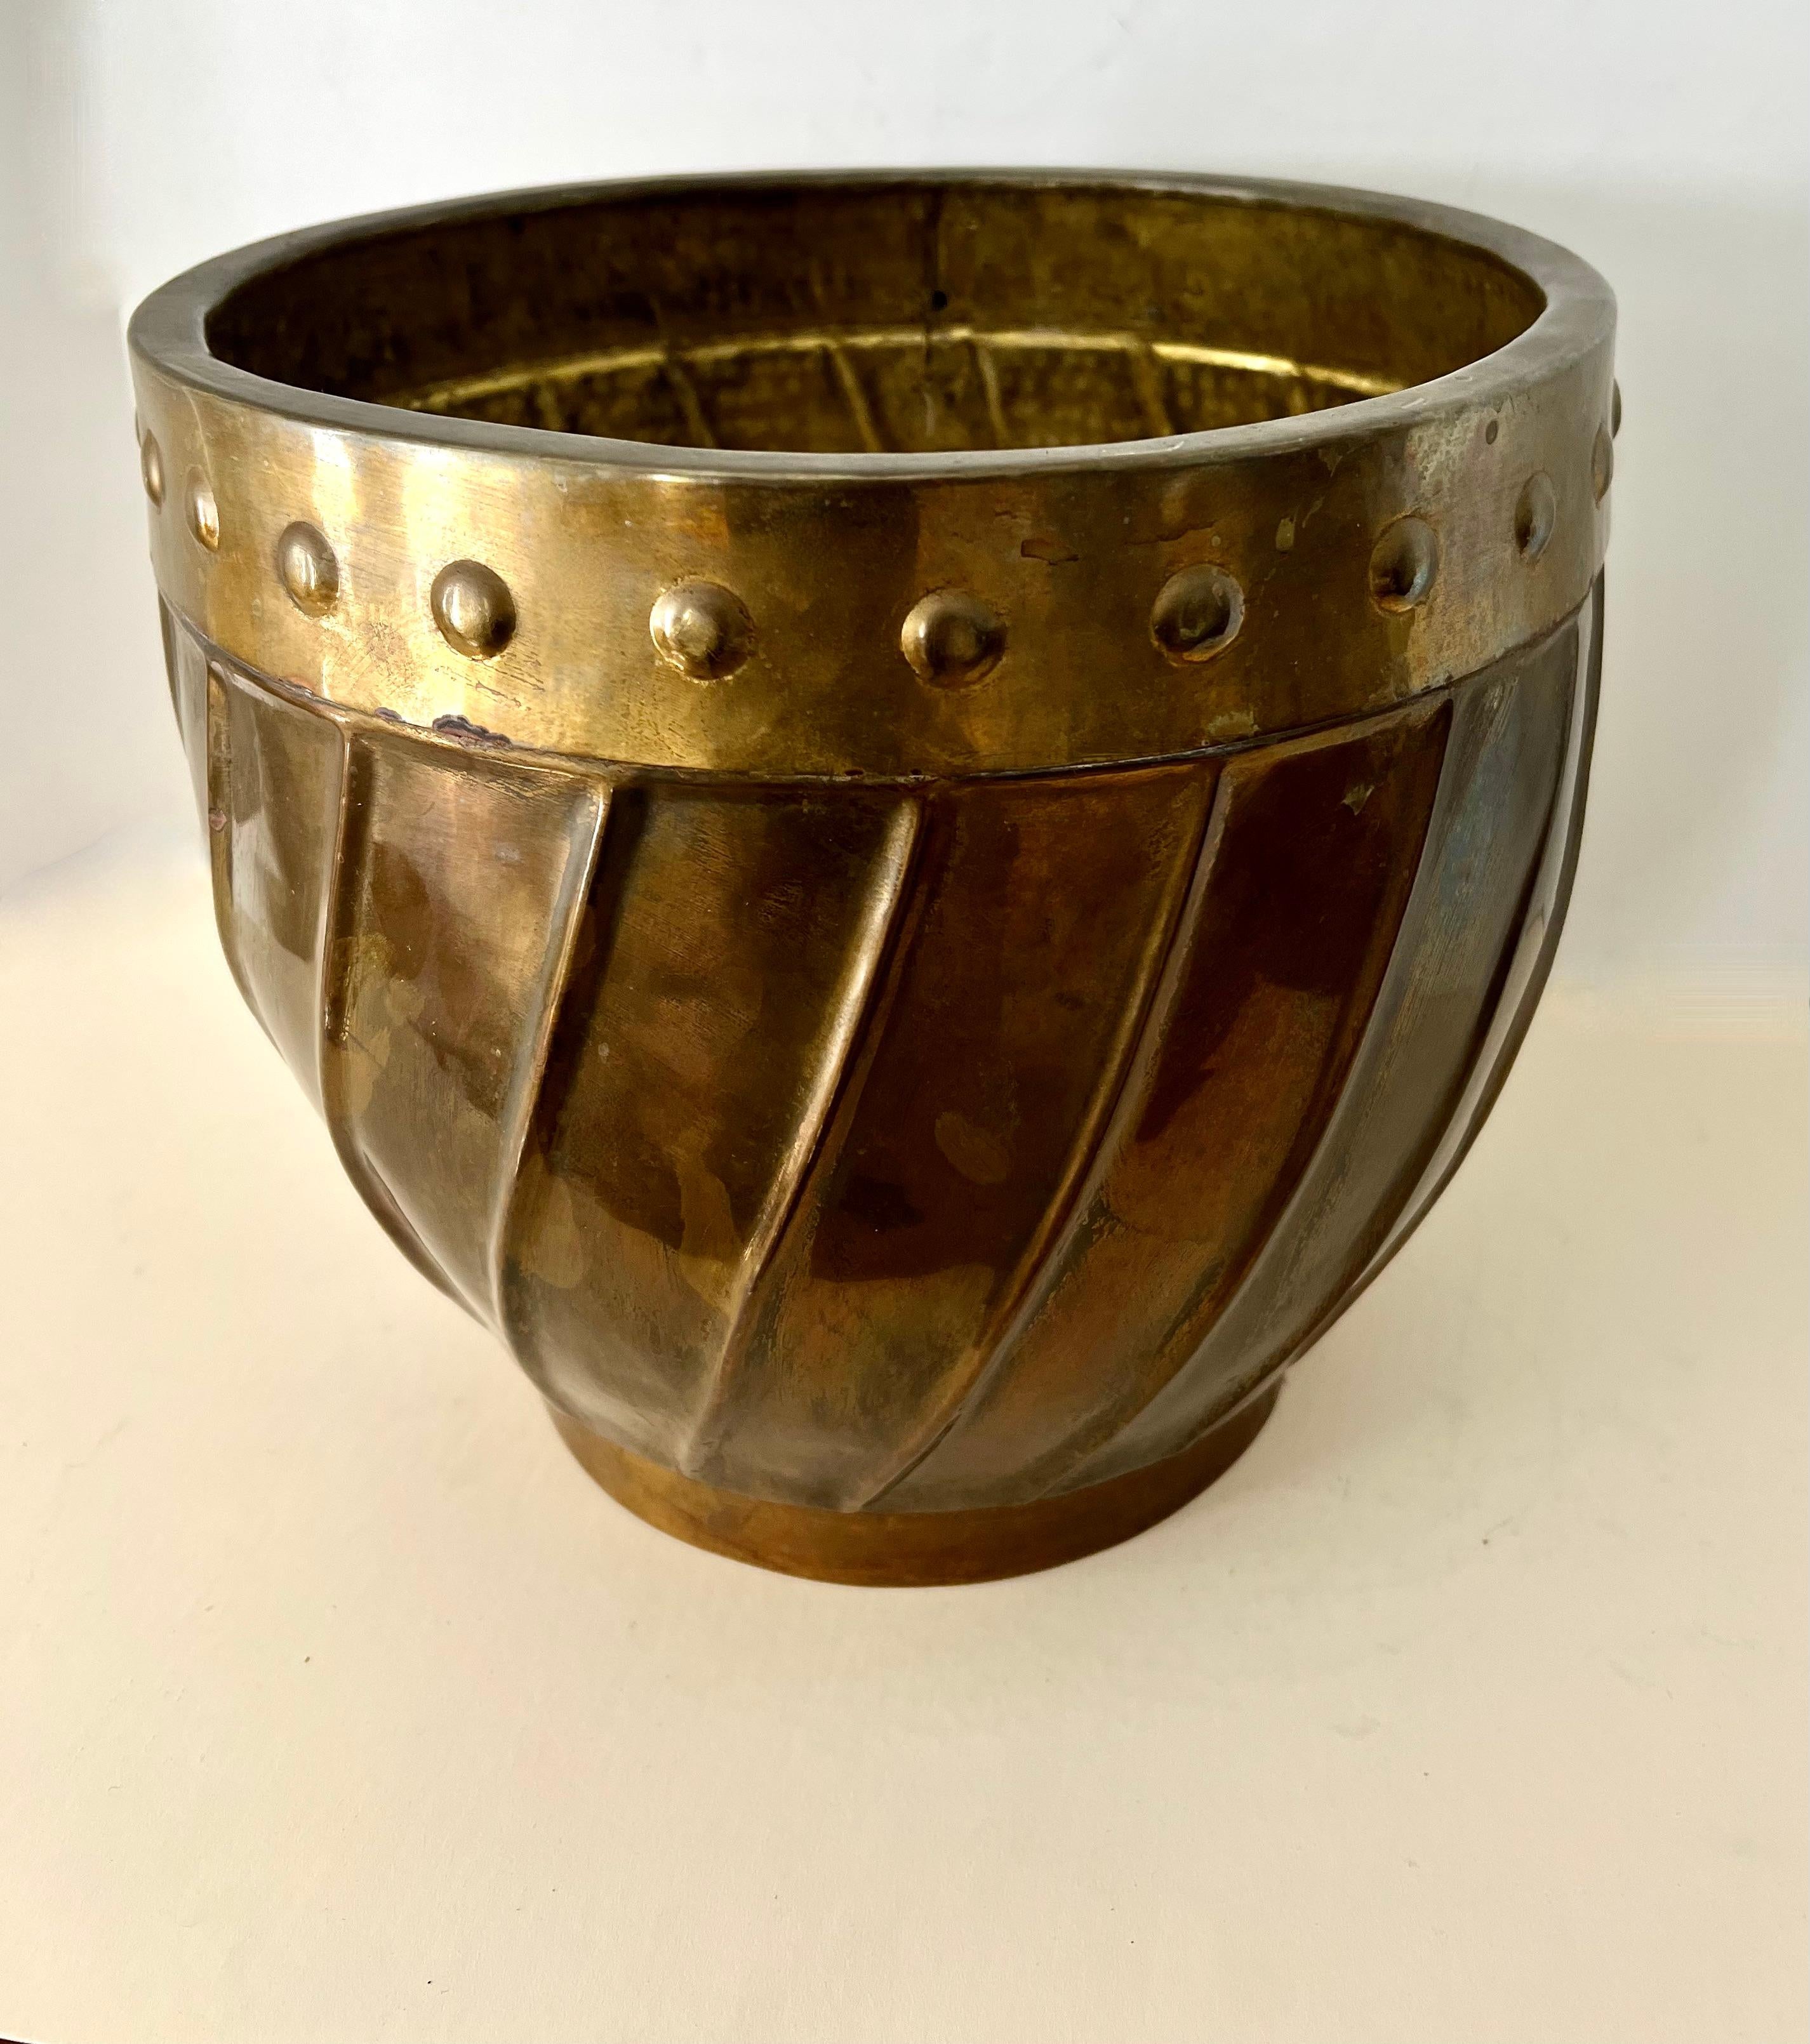 A wonderful Brass jardiniere, planter or Cachepot. The piece has a band with round convex 'button's and a nice swirl pattern below. 

A compliment to any space - could be used as a planter on the floor, on a console or to store things. A great